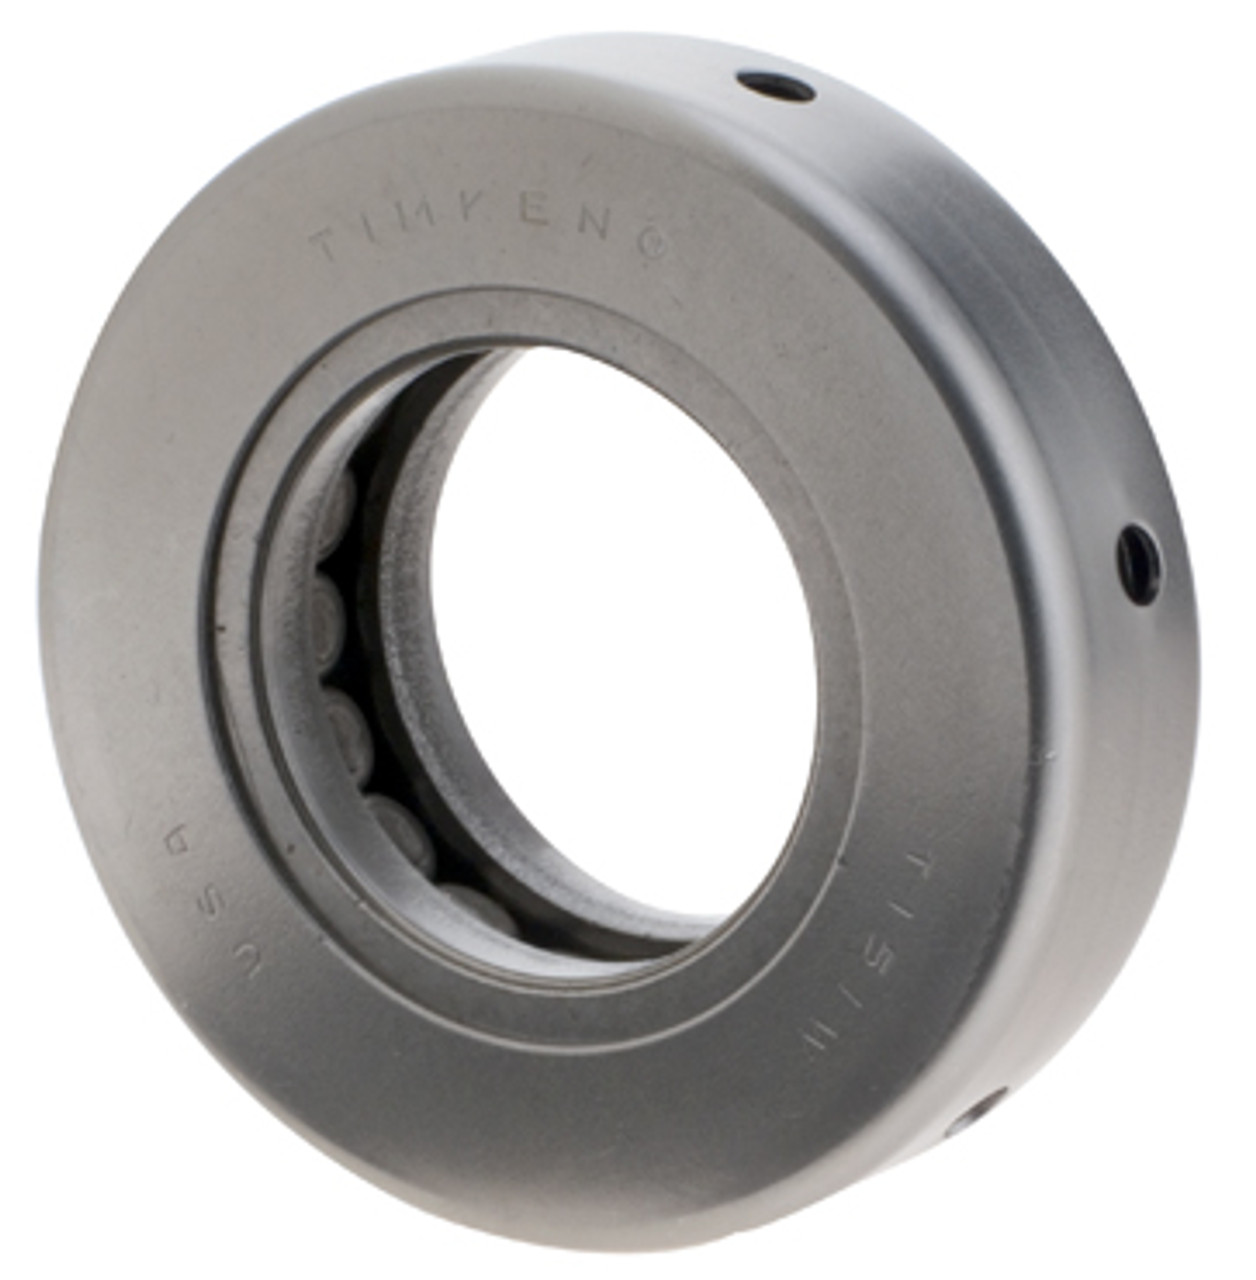 Timken® Stamped Race Thrust Bearing  T126W-904A5